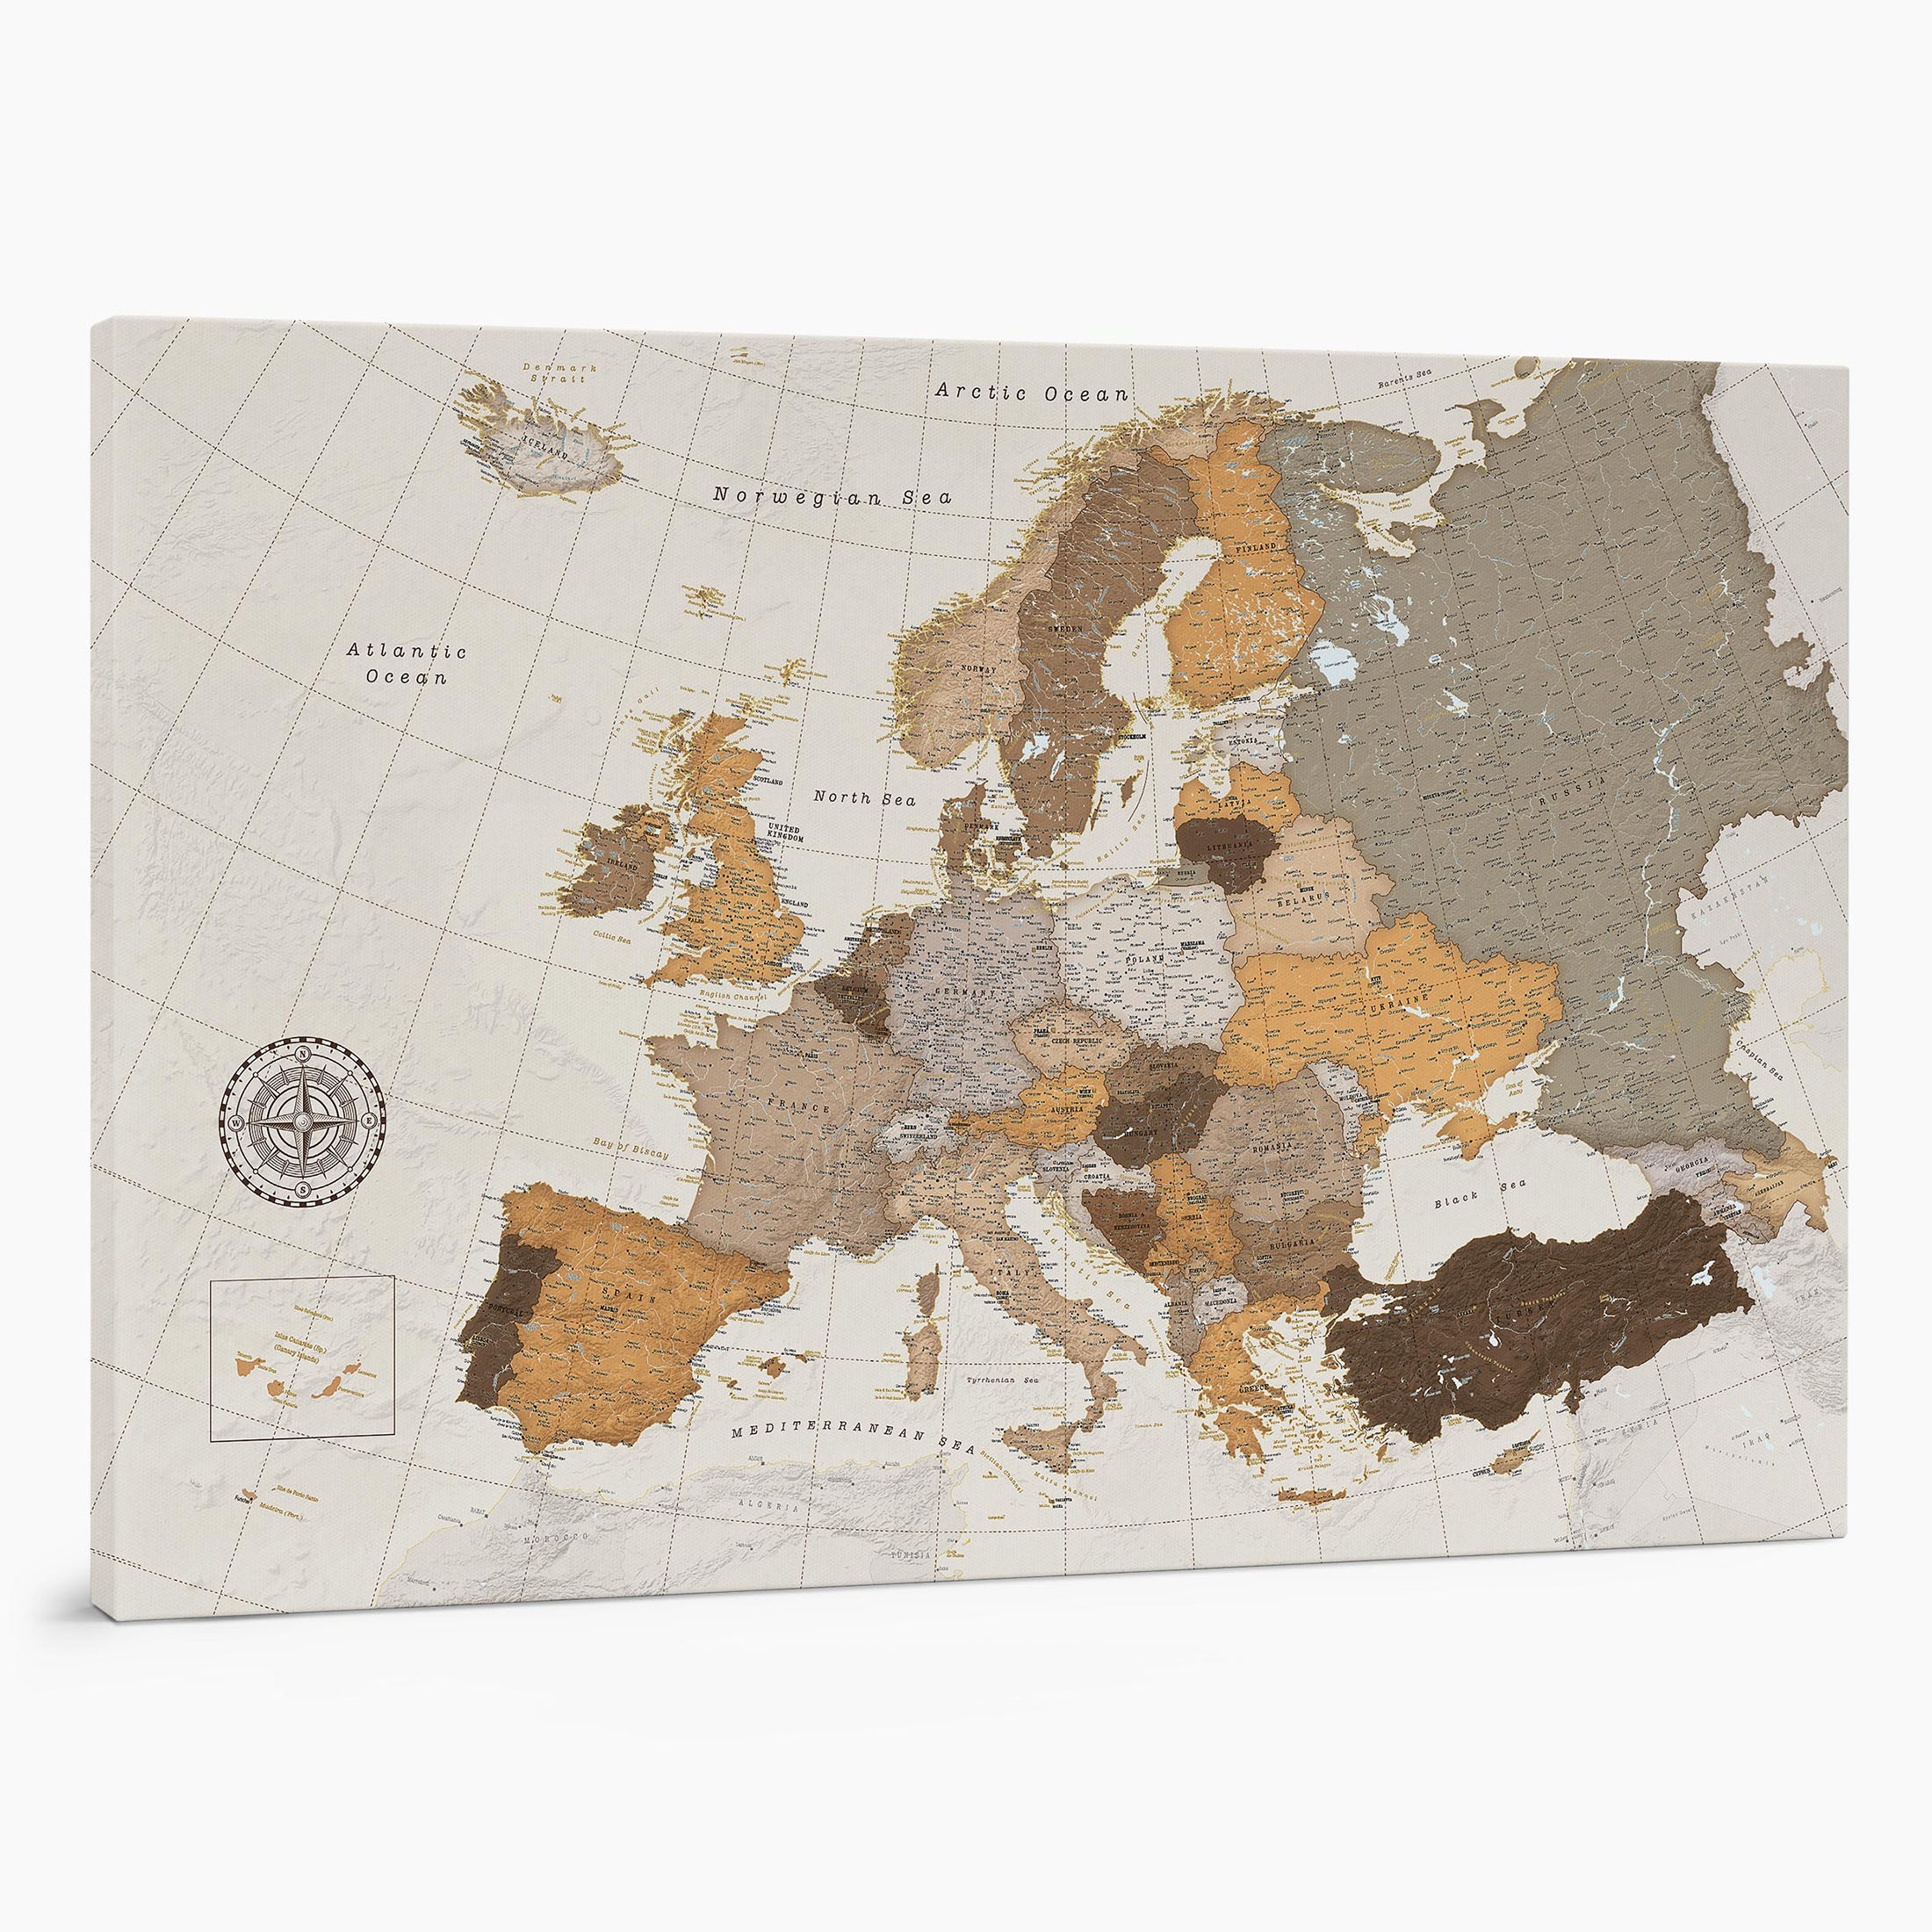 12EU large push pin europe map to track places visited on canvas safari